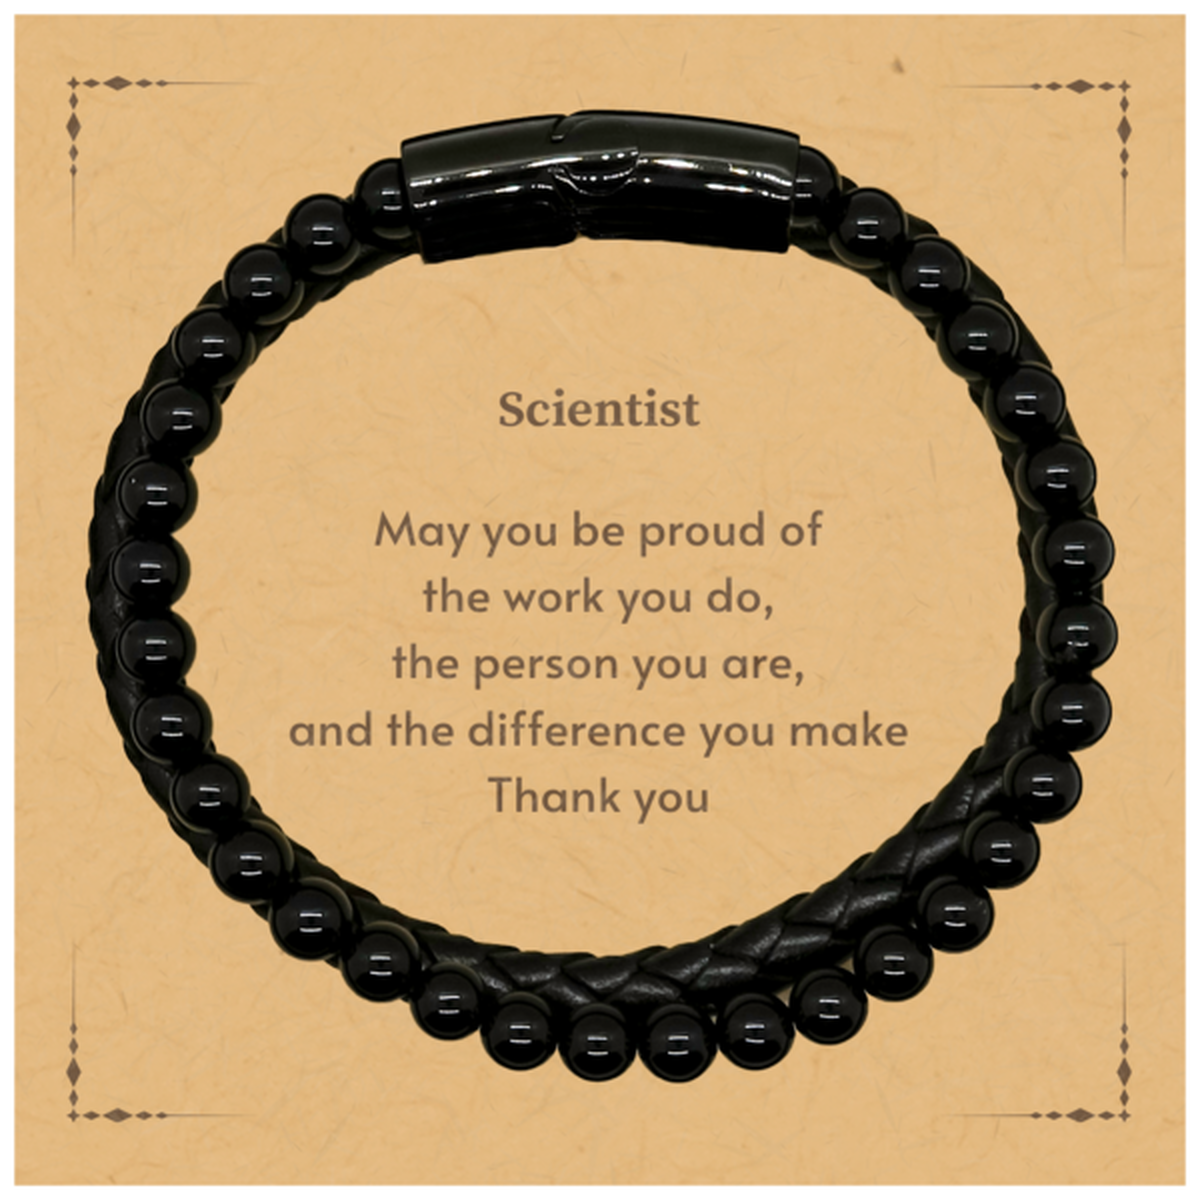 Heartwarming Stone Leather Bracelets Retirement Coworkers Gifts for Scientist, Scientist May You be proud of the work you do, the person you are Gifts for Boss Men Women Friends